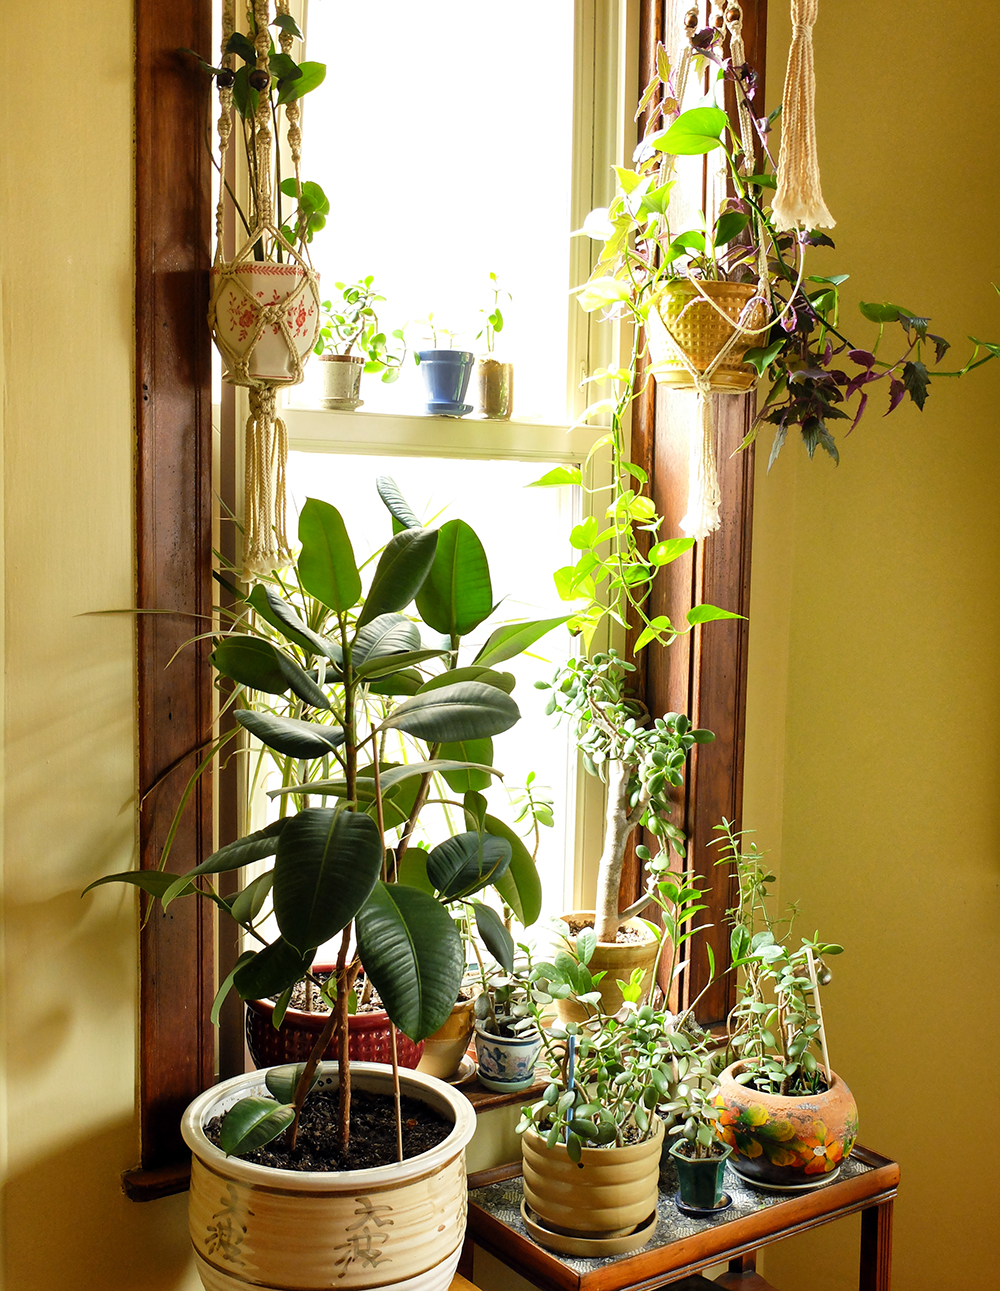 Plants in the sunny window